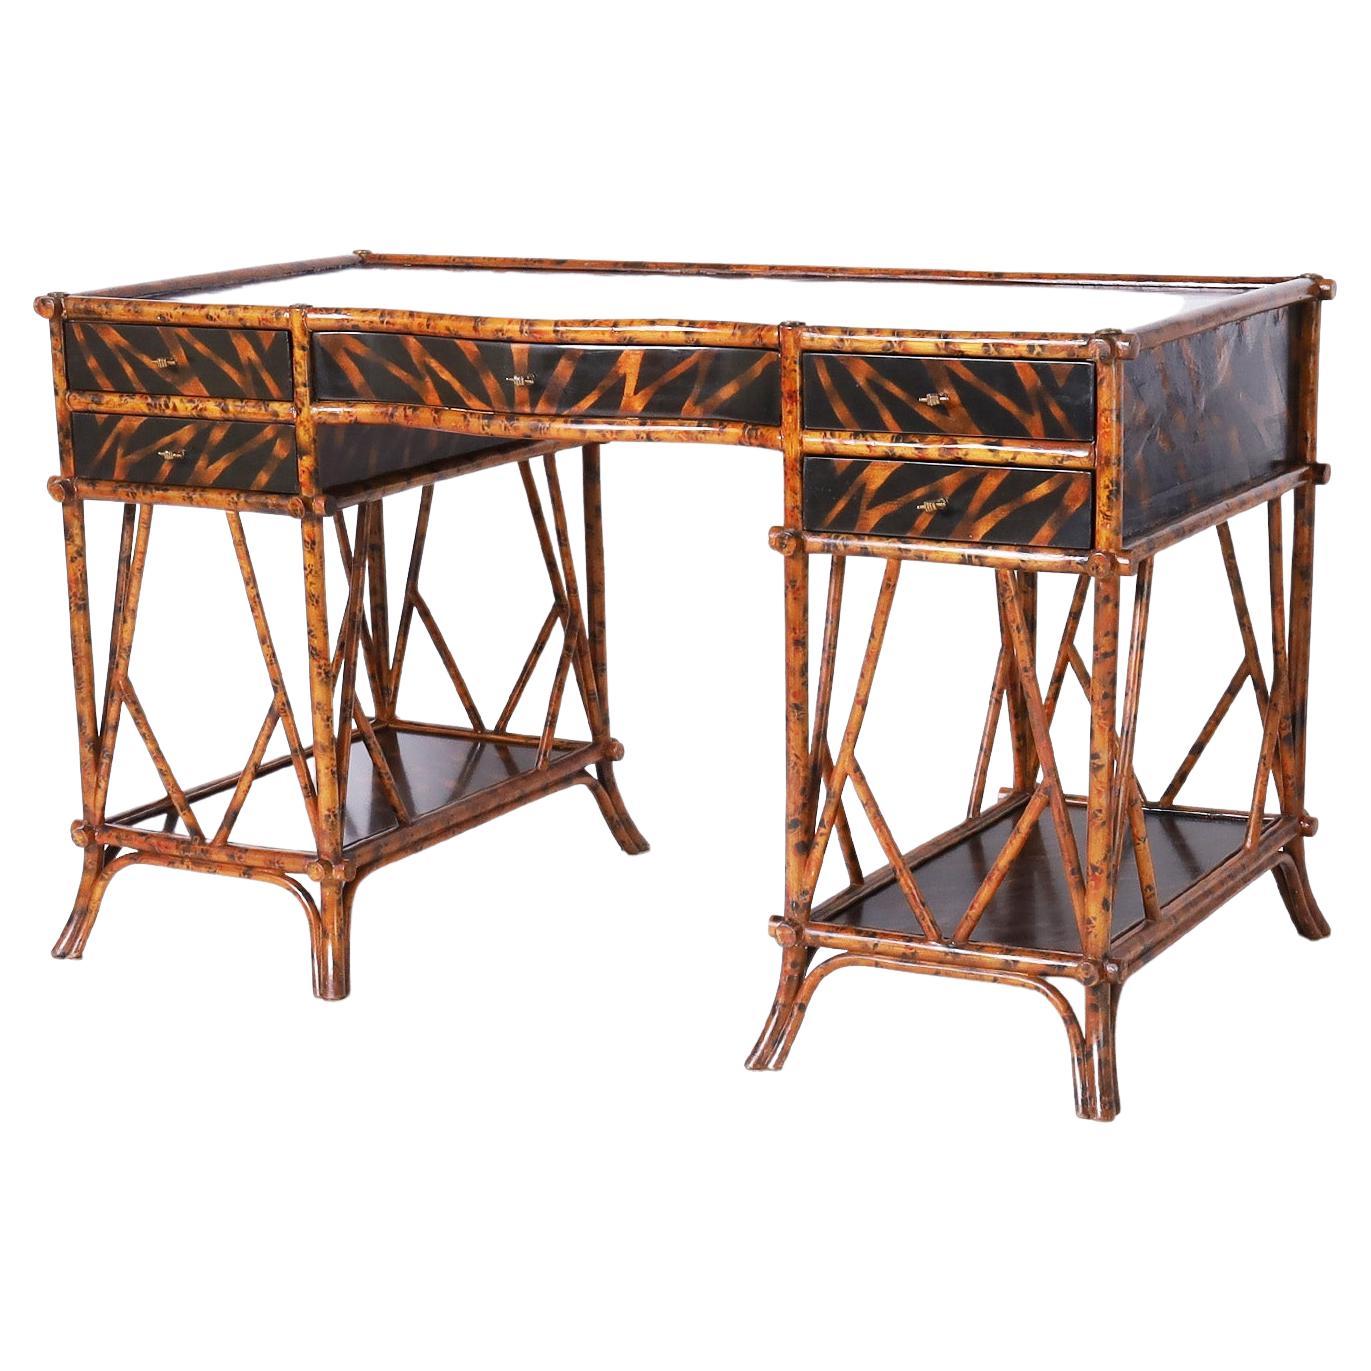 British Colonial Style Faux Bamboo Desk by Maitland-Smith